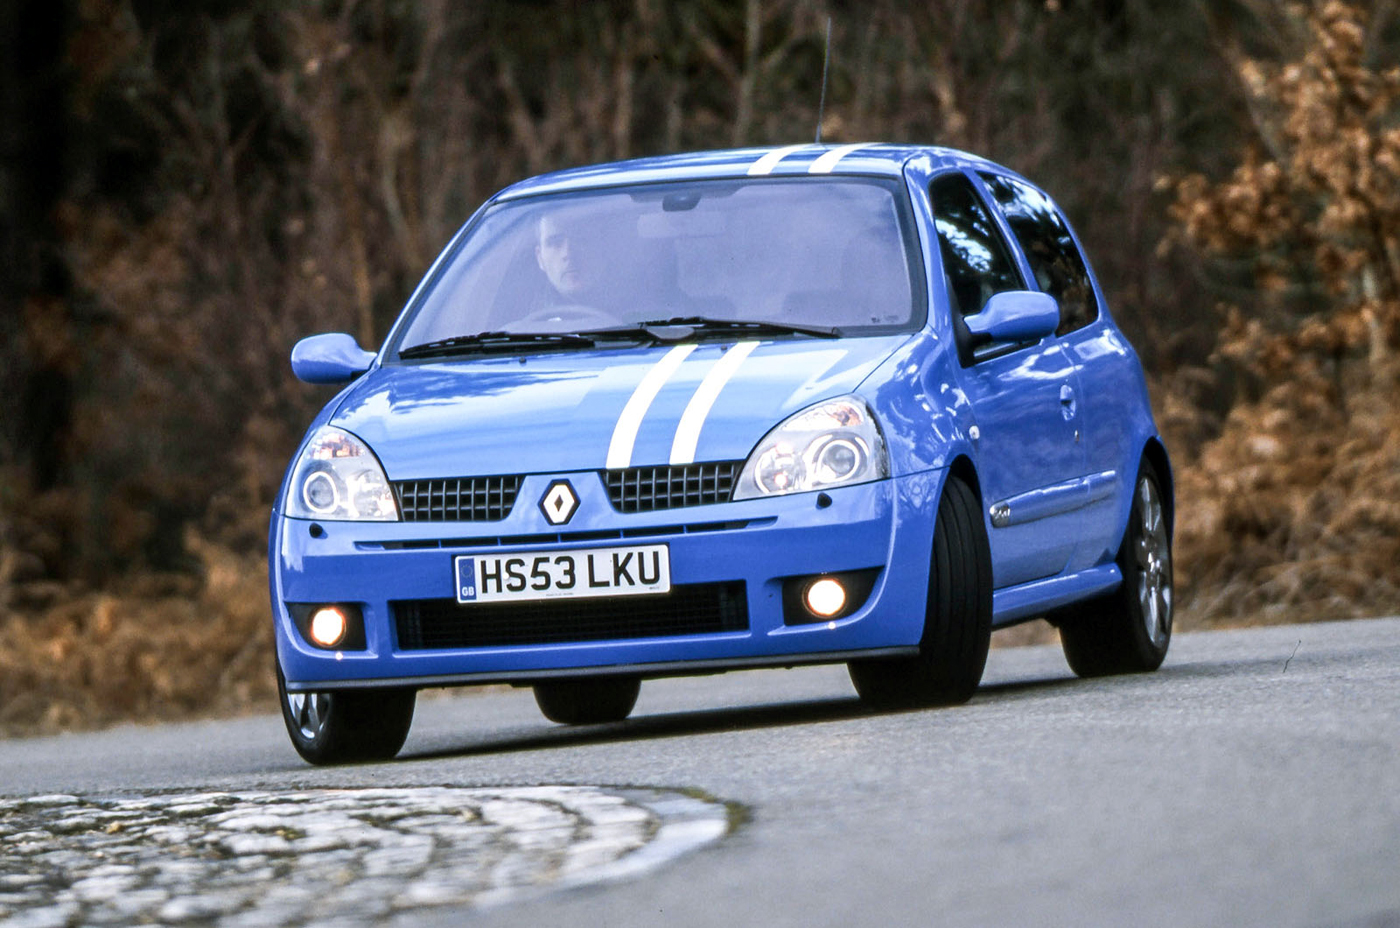 According to the British, this is the best hot hatch of the 21st century